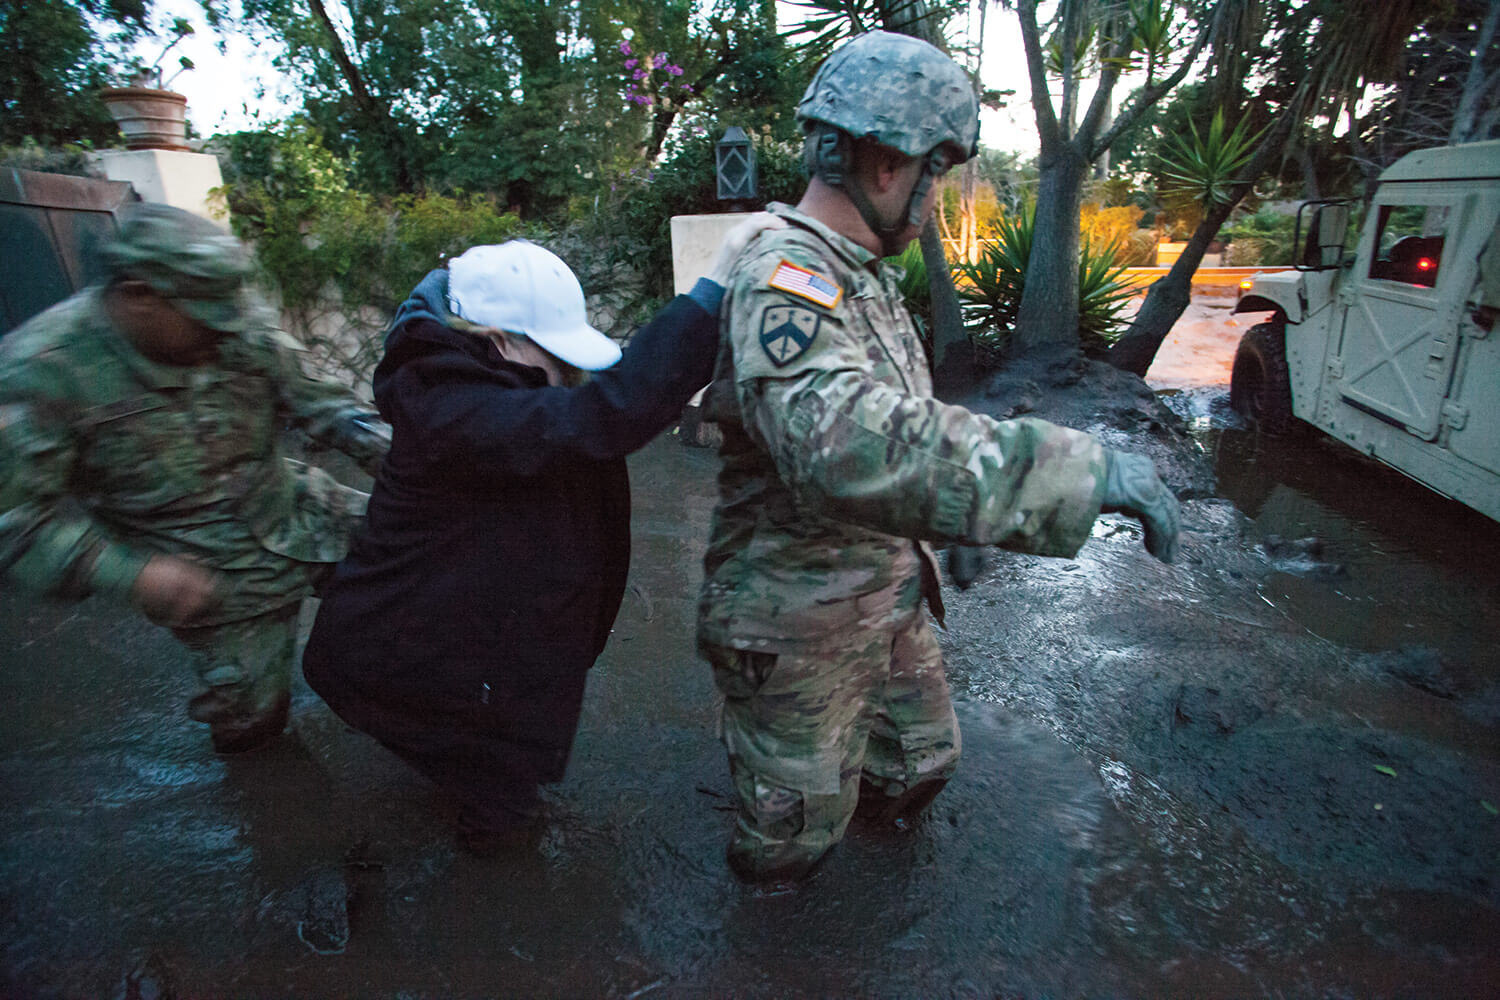 SGT Jose Paiz (right) and SSG Michael Aguilar both of the 1114th Composite Truck Company, California Army National Guard, guide a resident through thick, knee-deep mud from a Montecito, Calif., home to the Soldiers’ HMMWV. The 1114th is credited with rescuing or evacuating more than 1,800 citizens in the Montecito area following the deadly mudslide that struck the city in the predawn hours of Jan. 9, 2018. California National Guard photo by SrA Crystal Housman.